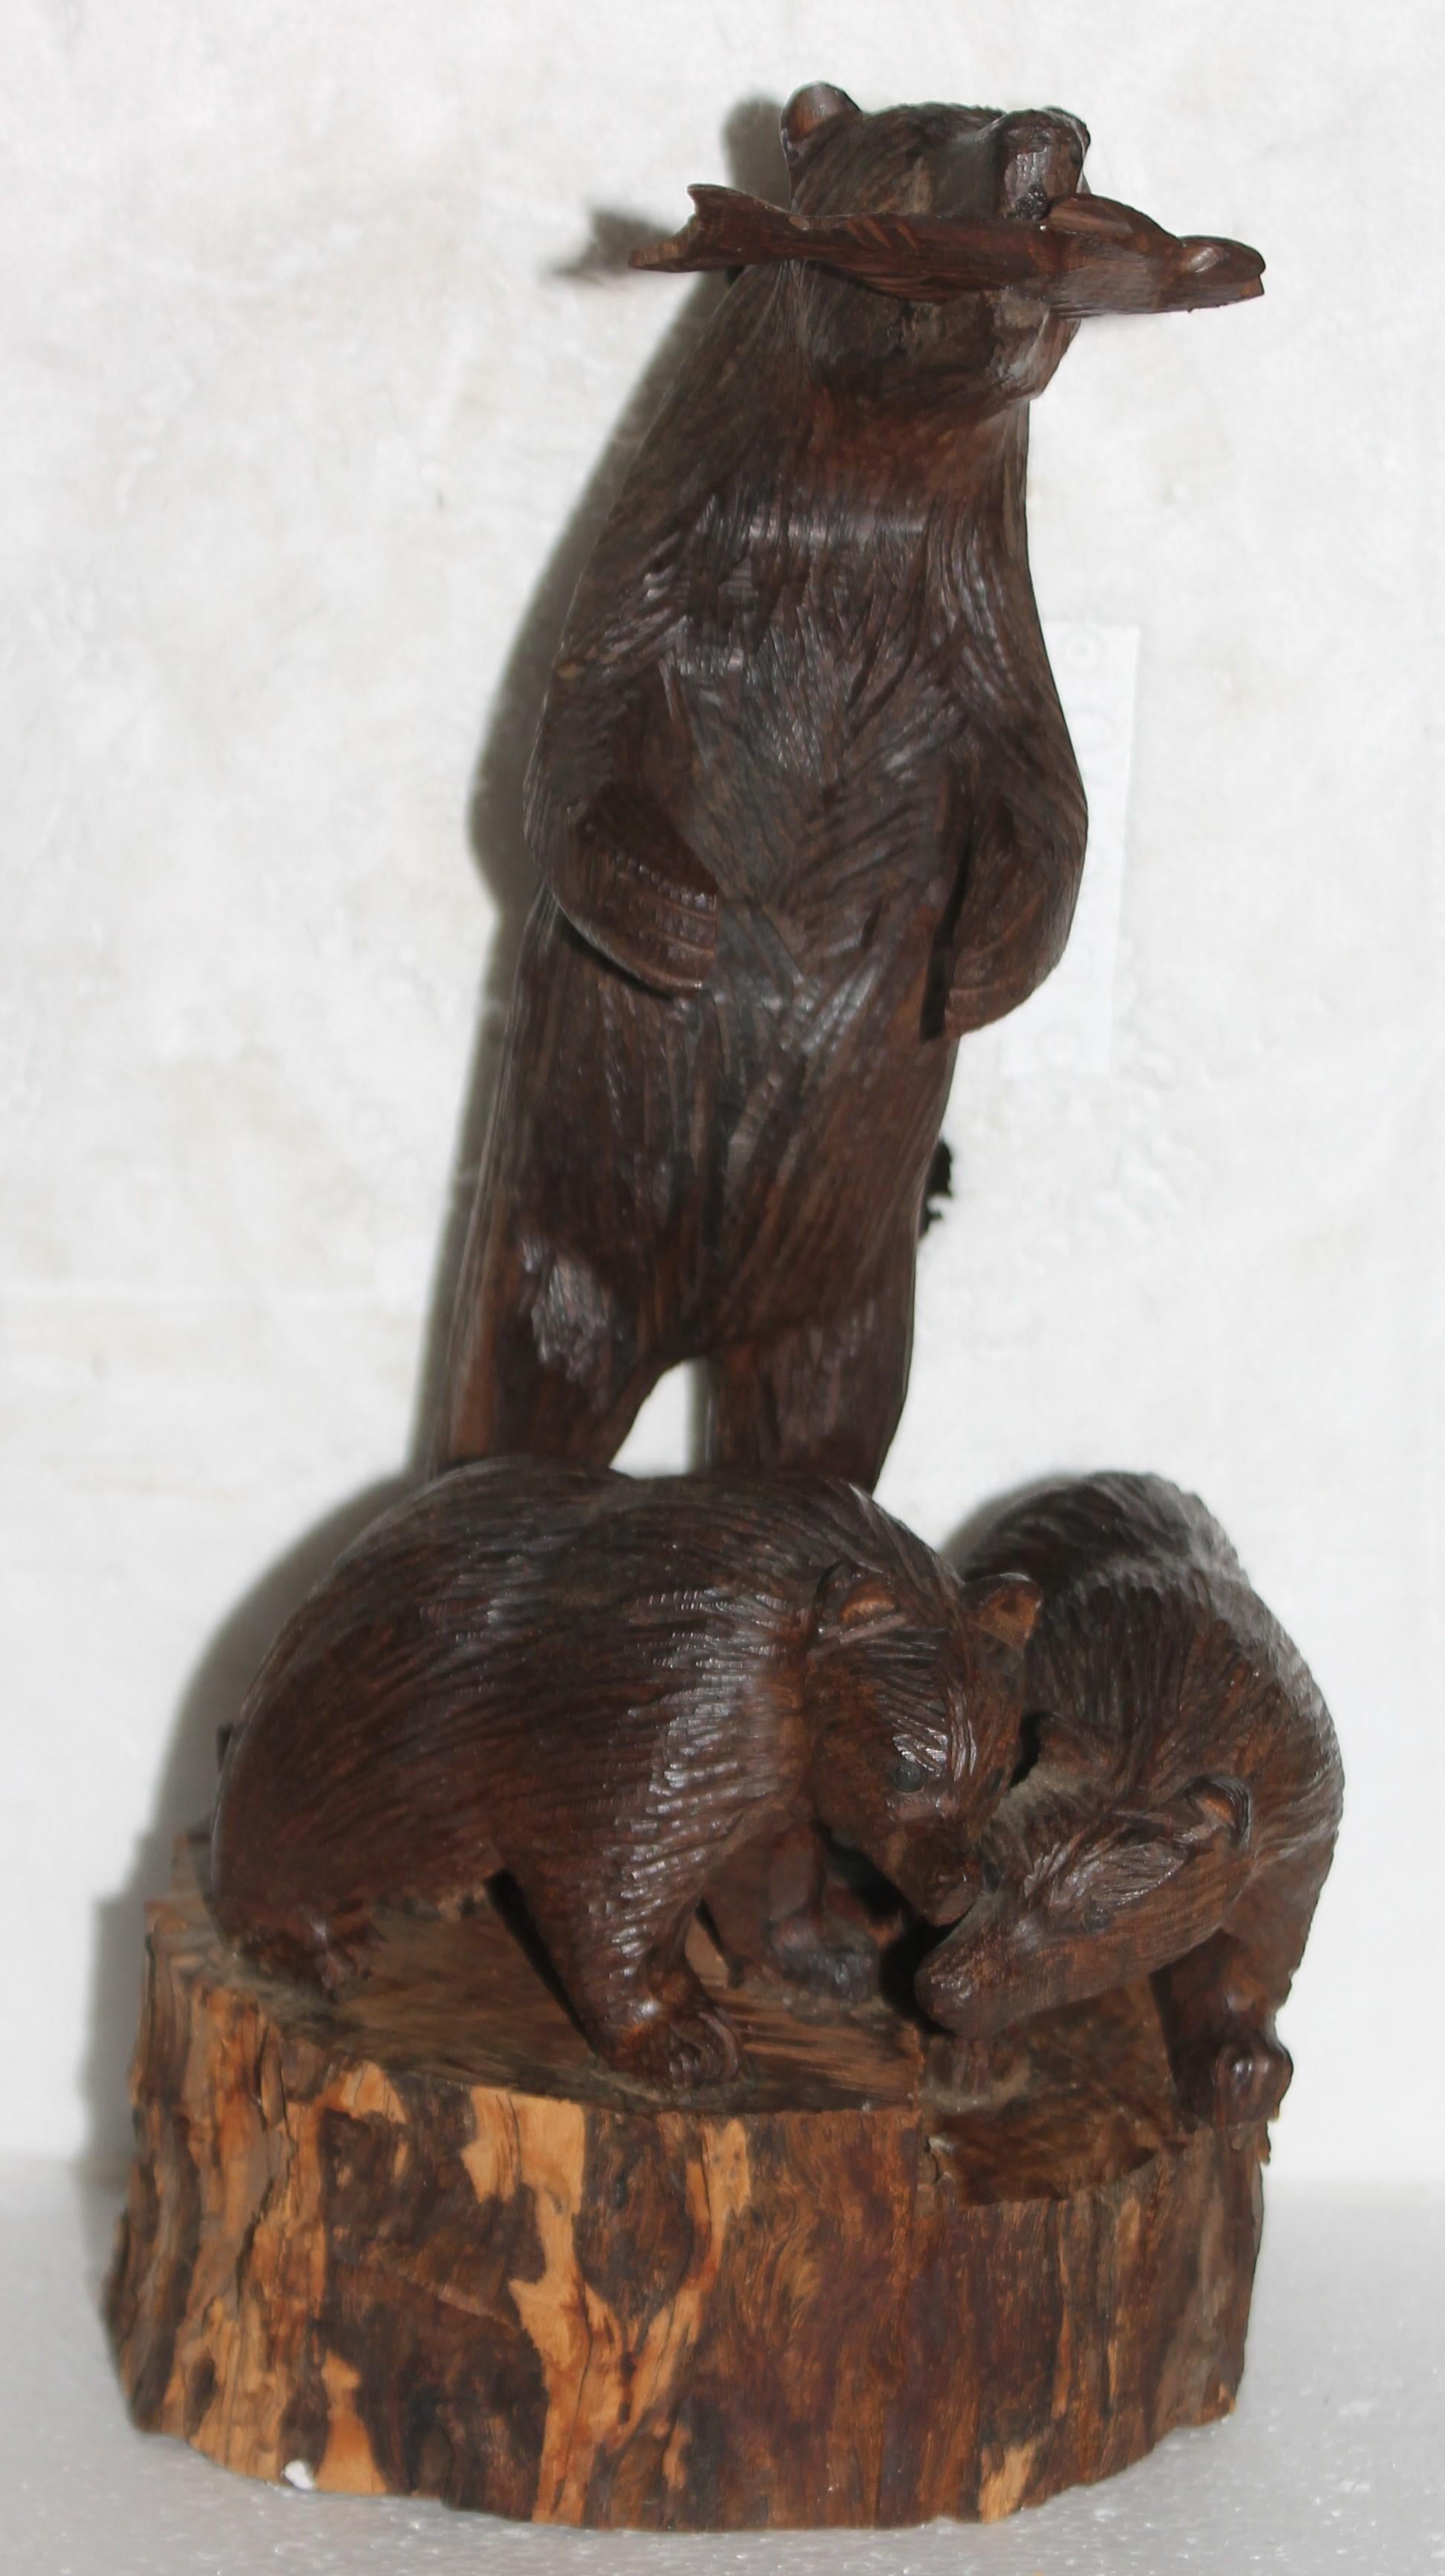 These hand carved bears are amazing and in great condition. These bears are carved out of one piece of wood or one log. The bottom is a plank of wood. The large bear has a carved wood fish in its mouth and there is two smaller bears at the base.